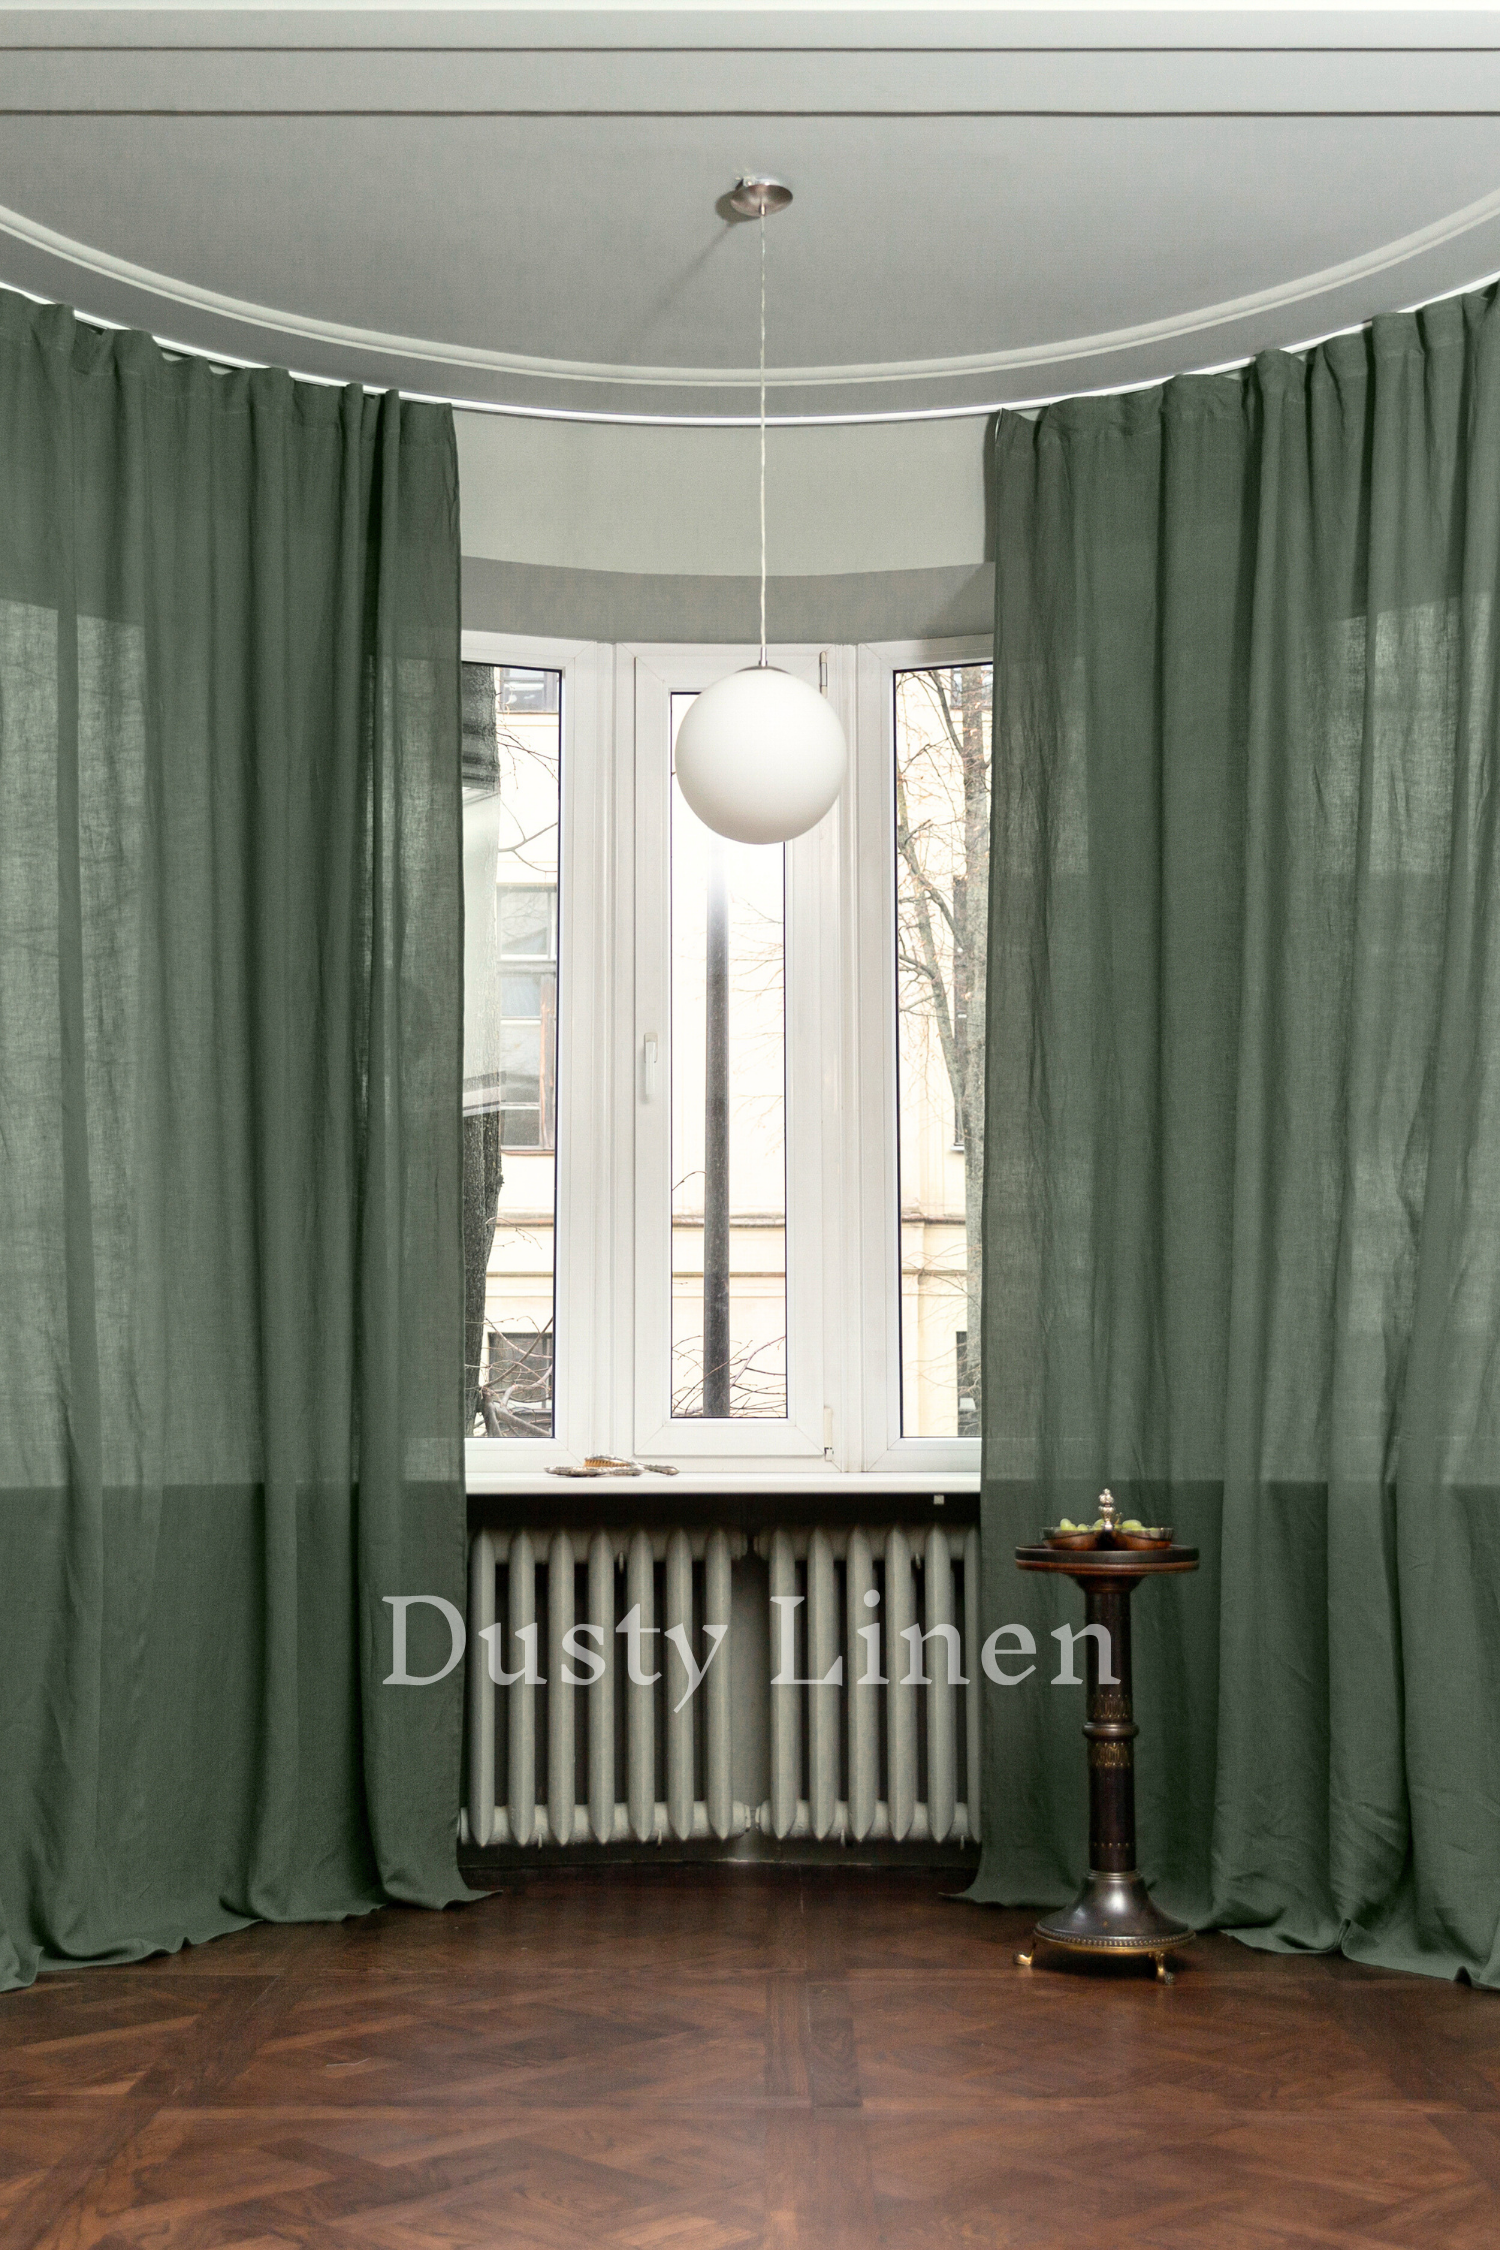 a room with a radiator, a radiator, and a window